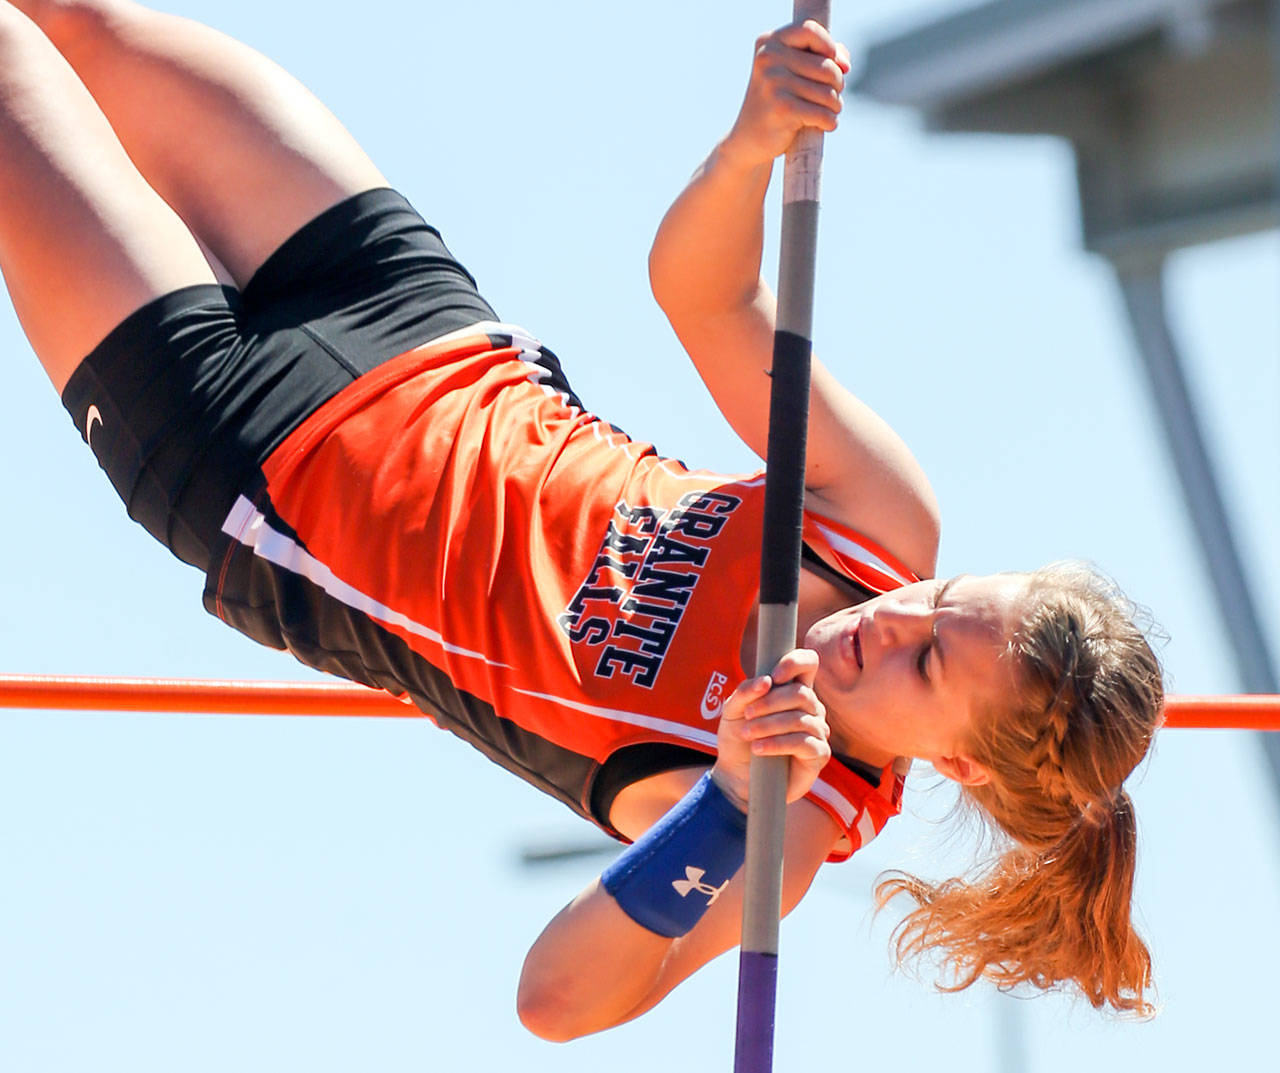 Kelsey Bassett of Granite Falls competes in the pole vault at the 2017 Class 2A state track and field championships in Tacoma last May. Bassett finished second in the event. (Kevin Clark / The Herald)                                Kelsey Bassett of Granite Falls competes in the pole vault at the 2017 Class 2A state track and field championships last May in Tacoma. Bassett finished second in the event. (Kevin Clark / The Herald)